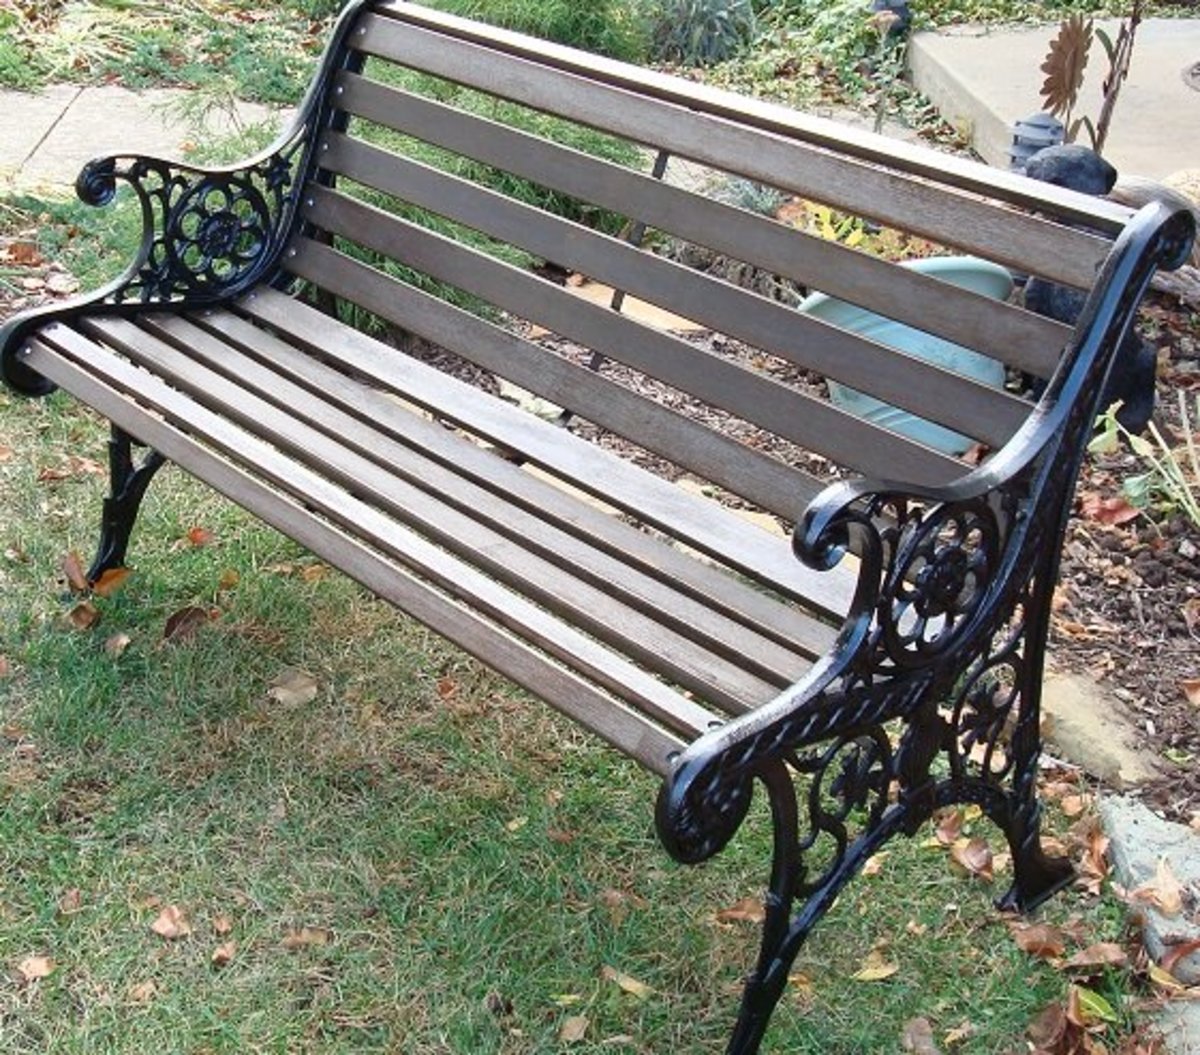 How to Restore a Wood and Cast Iron Garden Bench | Dengarden